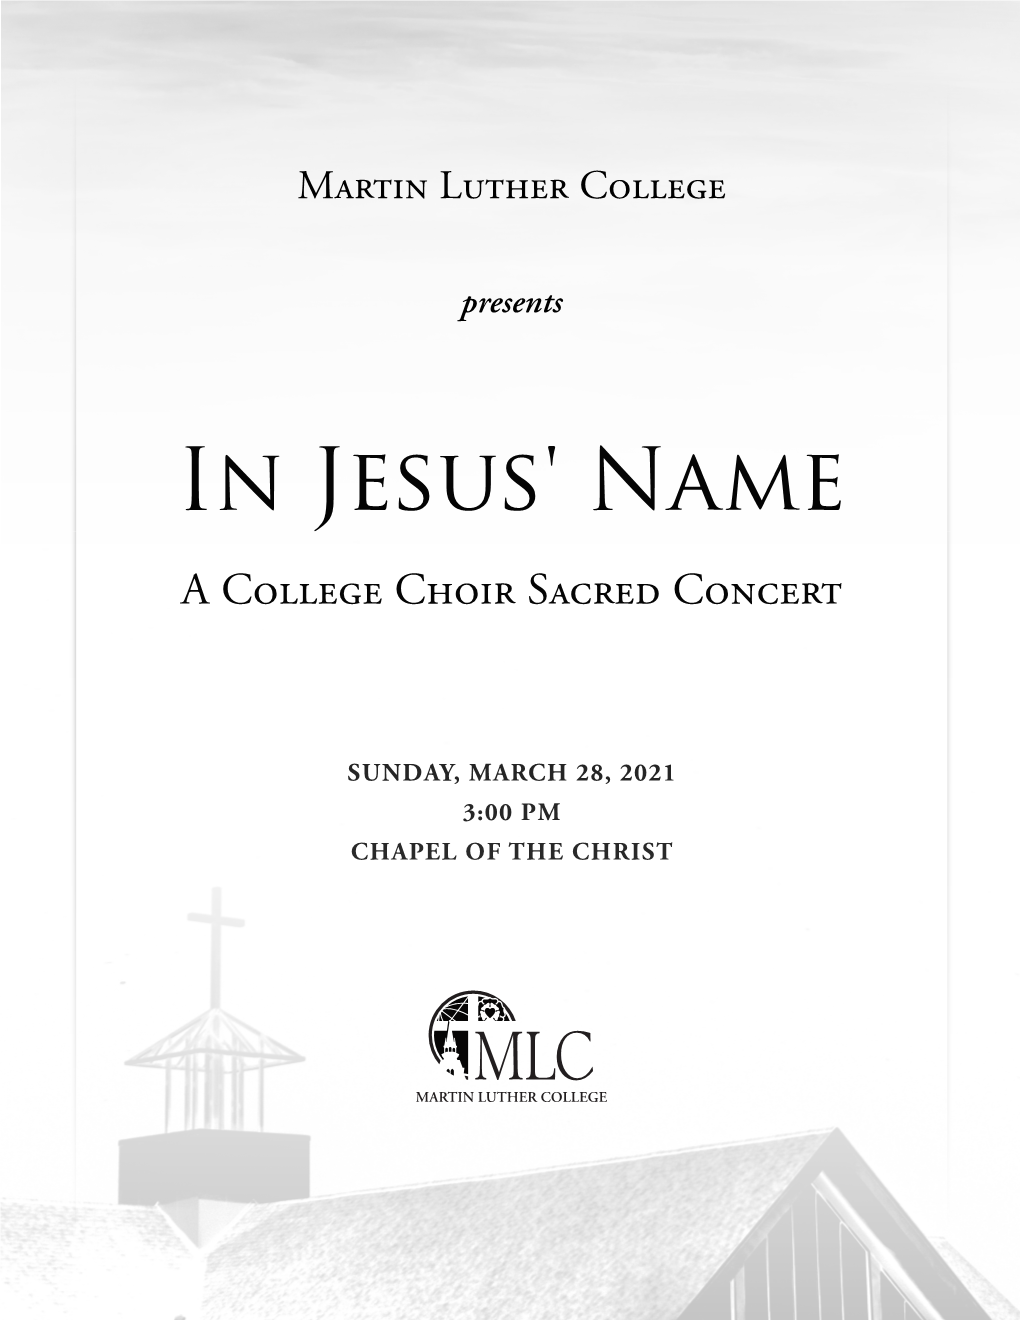 In Jesus' Name a College Choir Sacred Concert